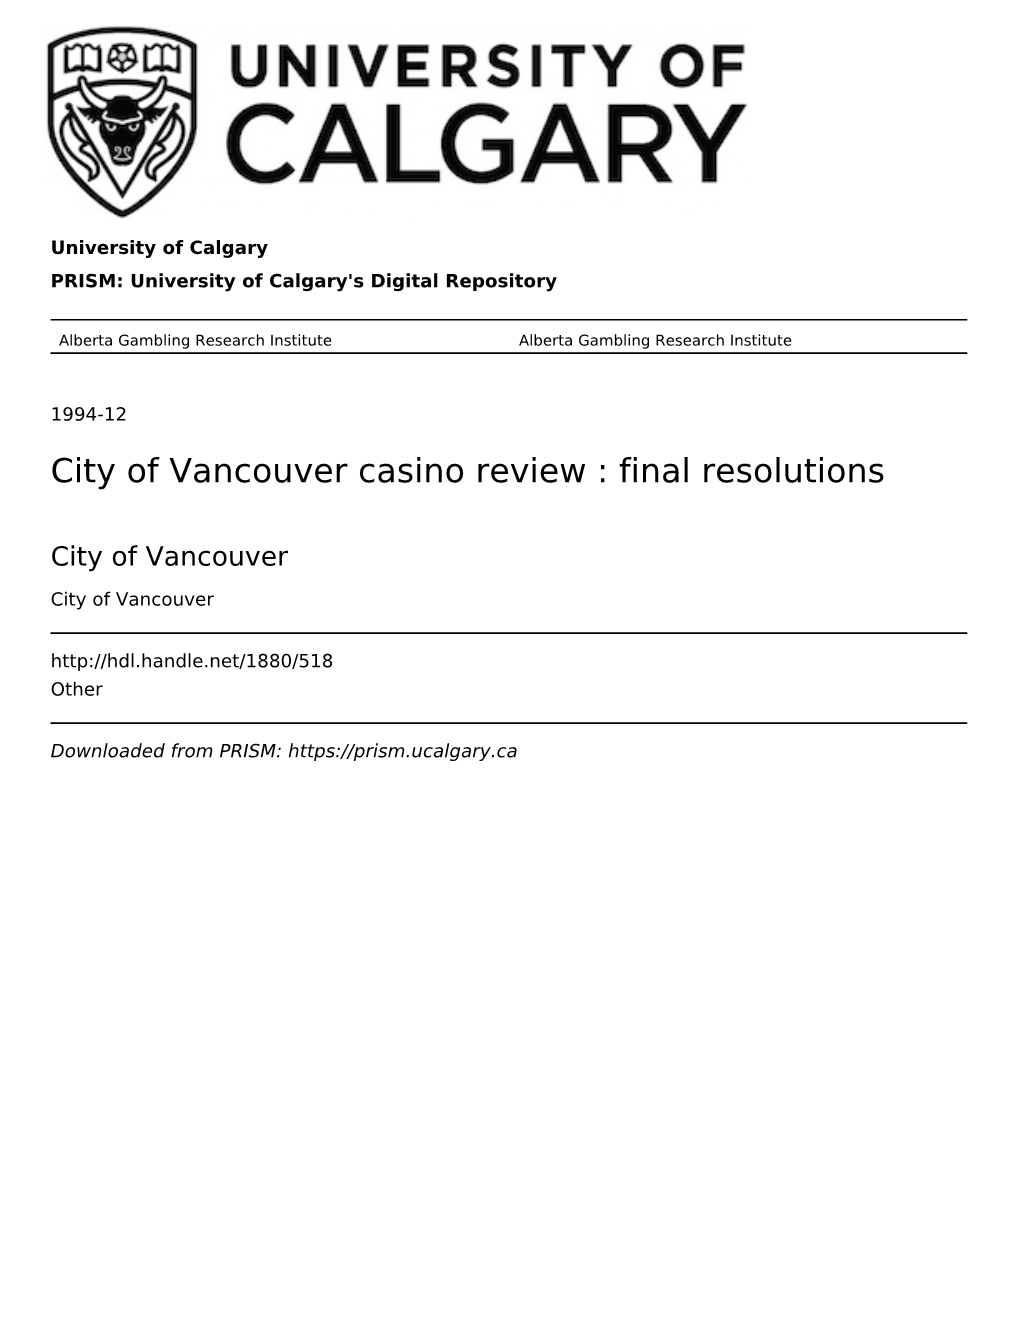 City of Vancouver Casino Review : Final Resolutions